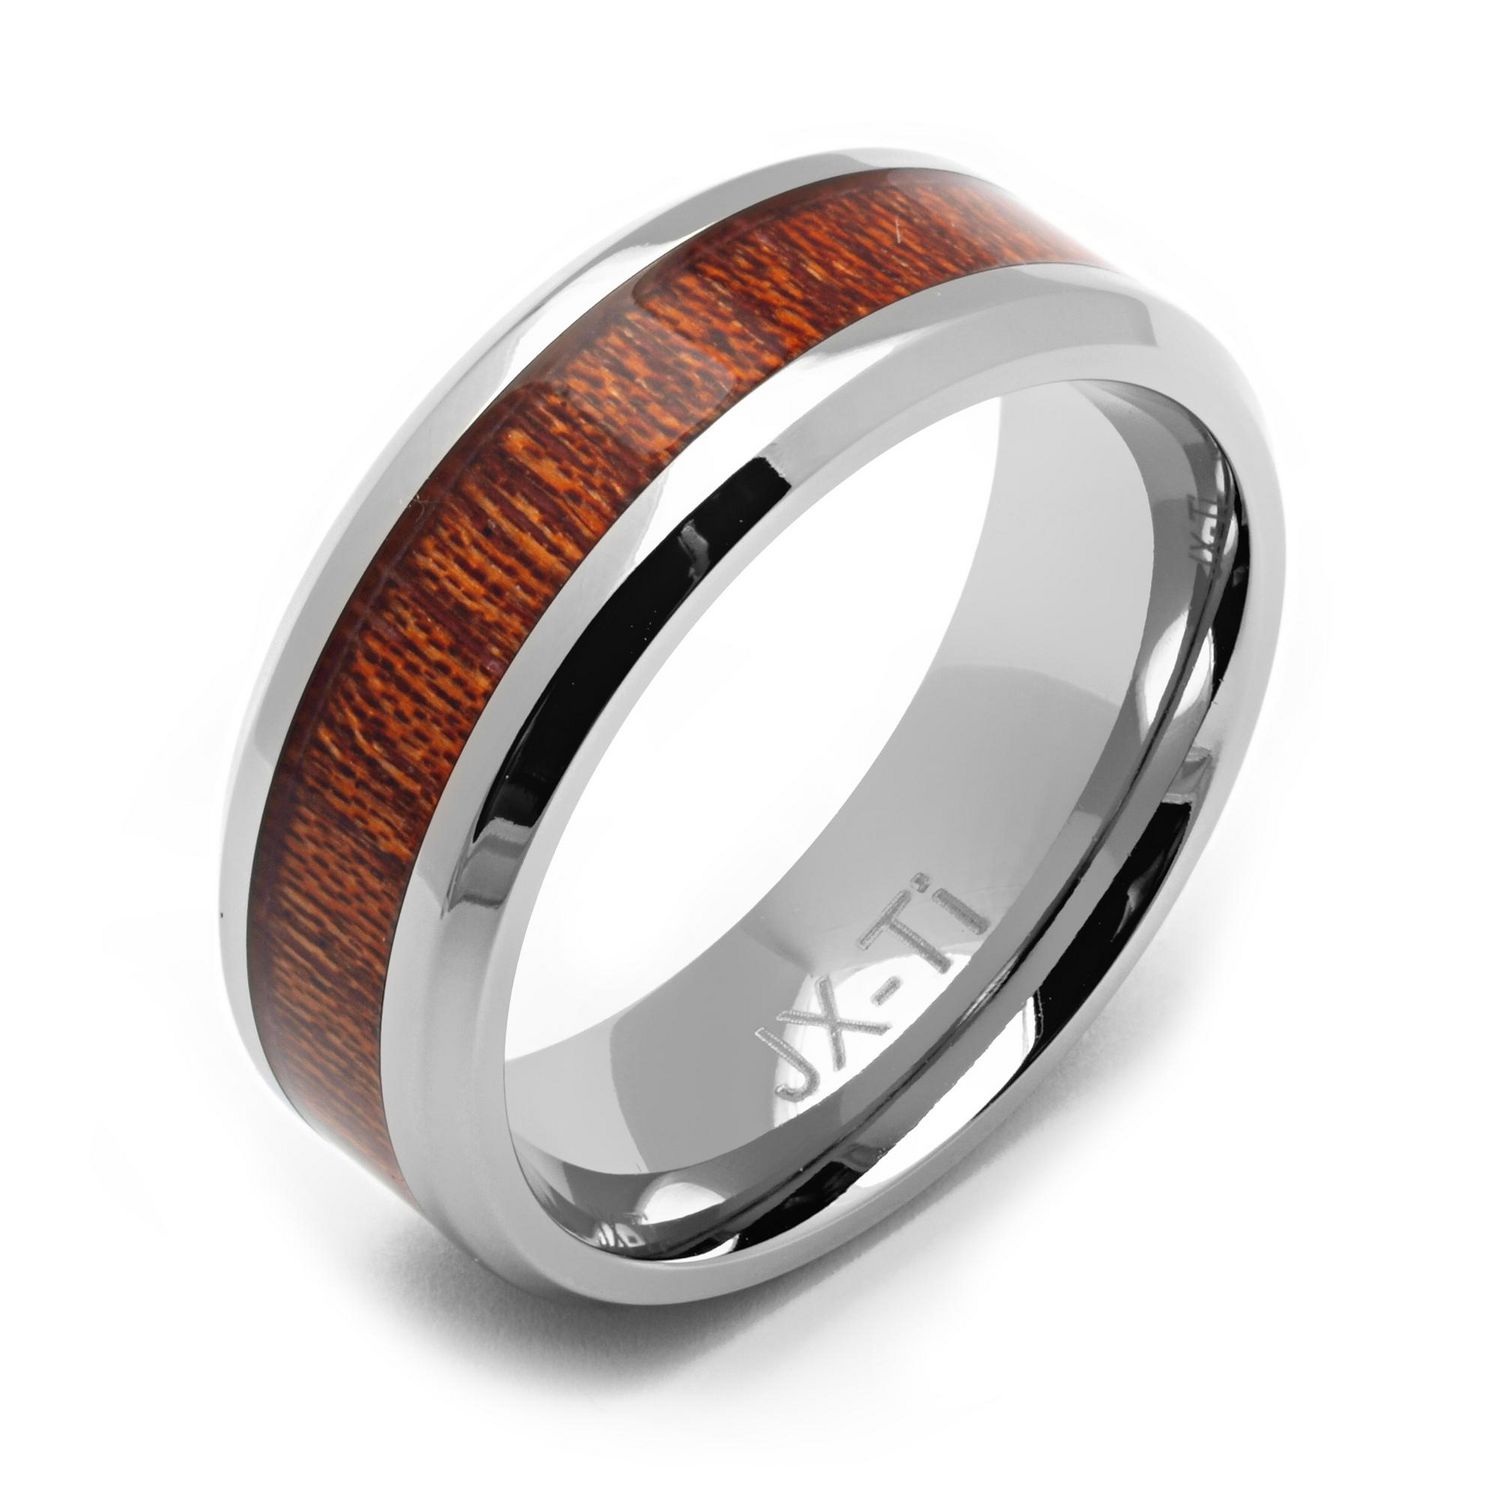 Men's Titanium Ring With Wood Inlay Size 8.5 